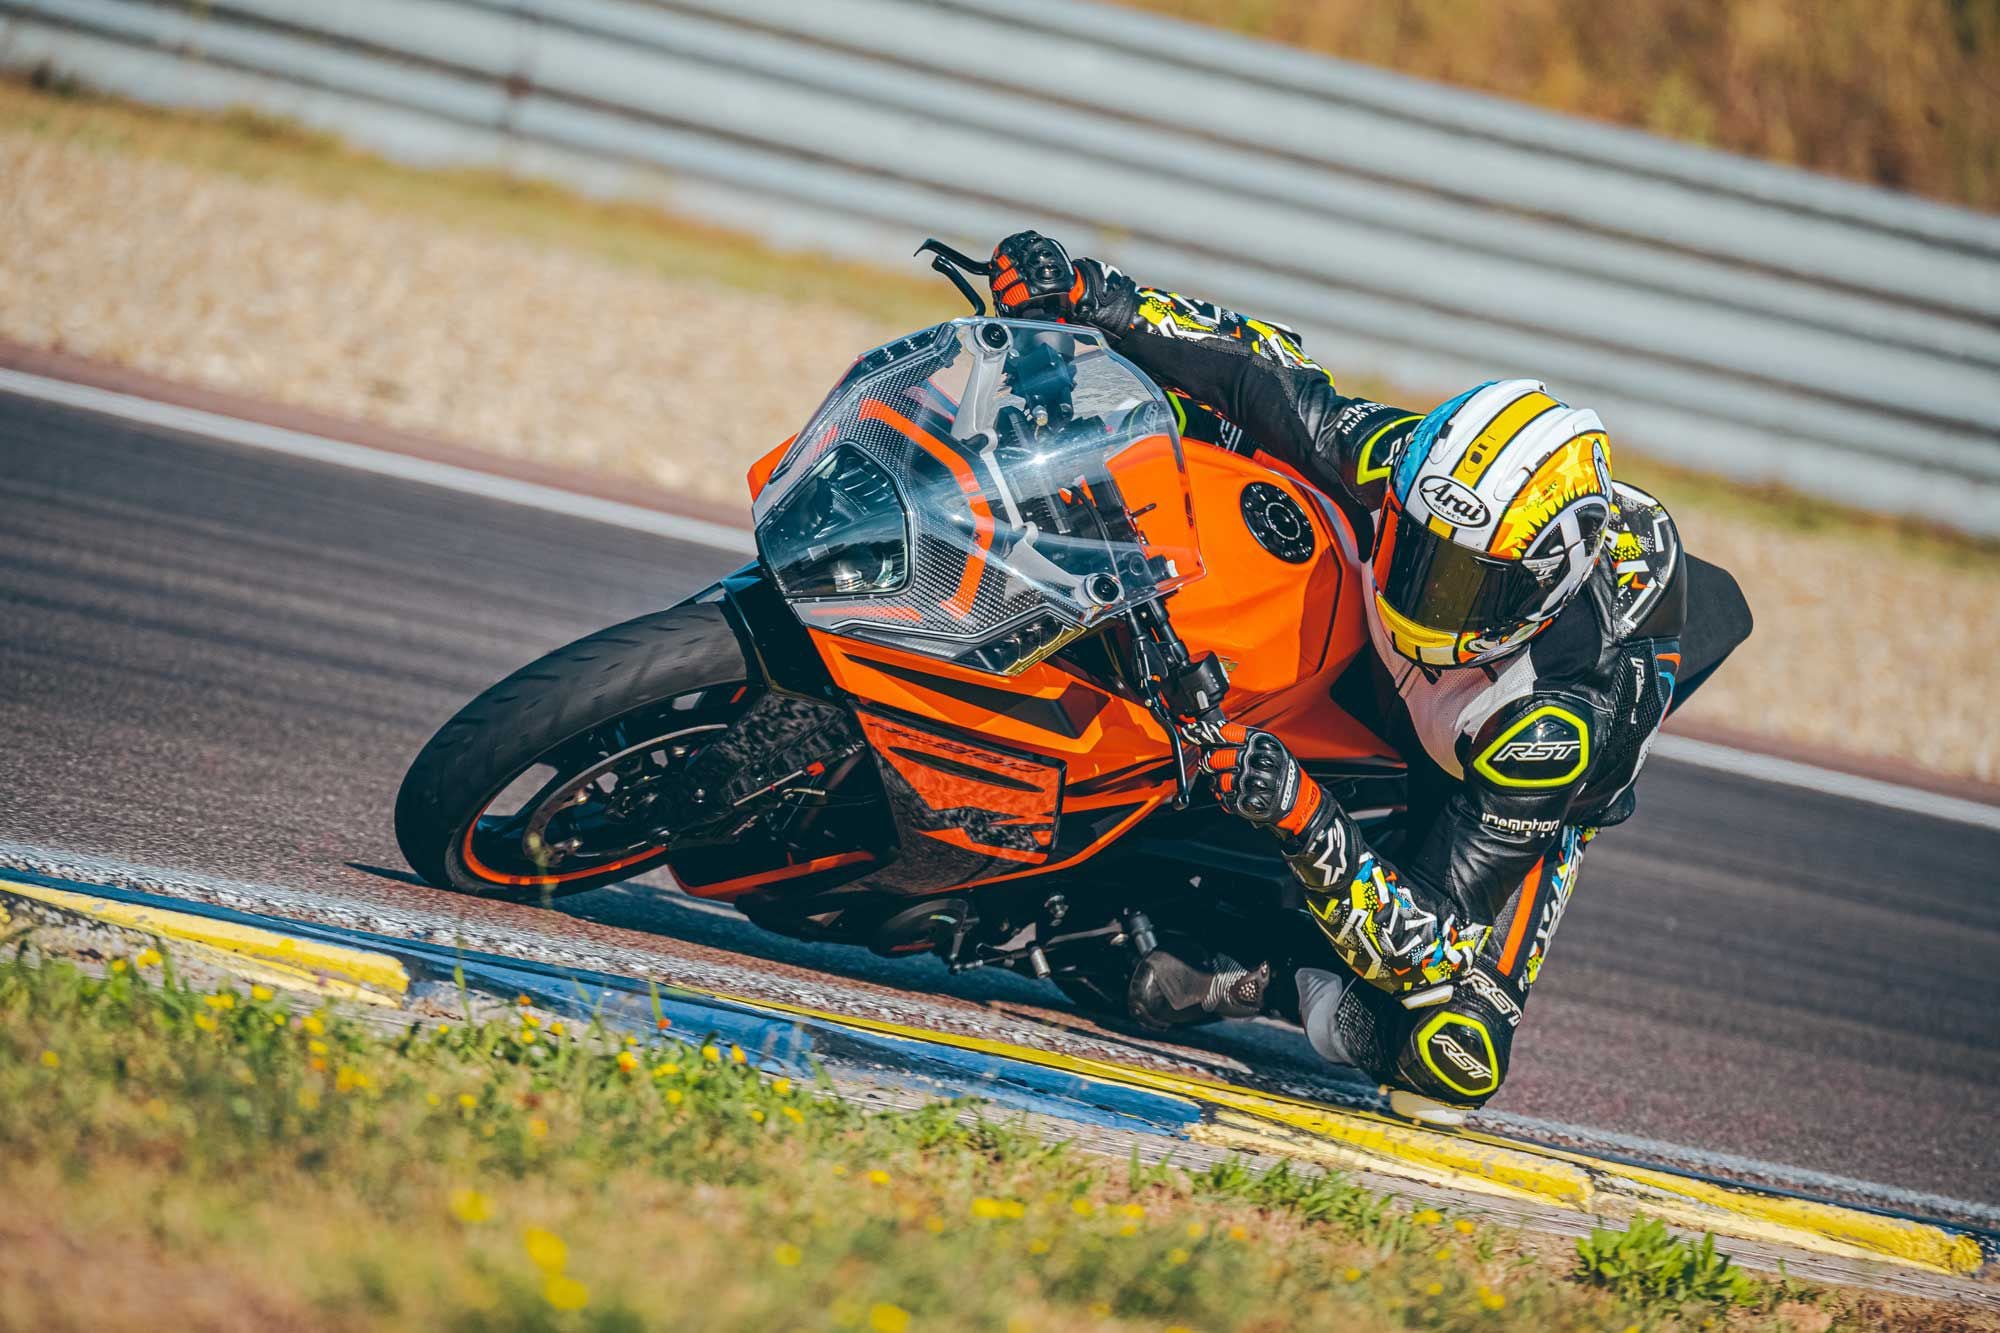 Under the scrutiny of track testing, the RC 390 is as much of a ripper as it is on the racetrack. The tight confines of our chosen test facility made for a wicked good trackday, highlighting the performance of the RC.